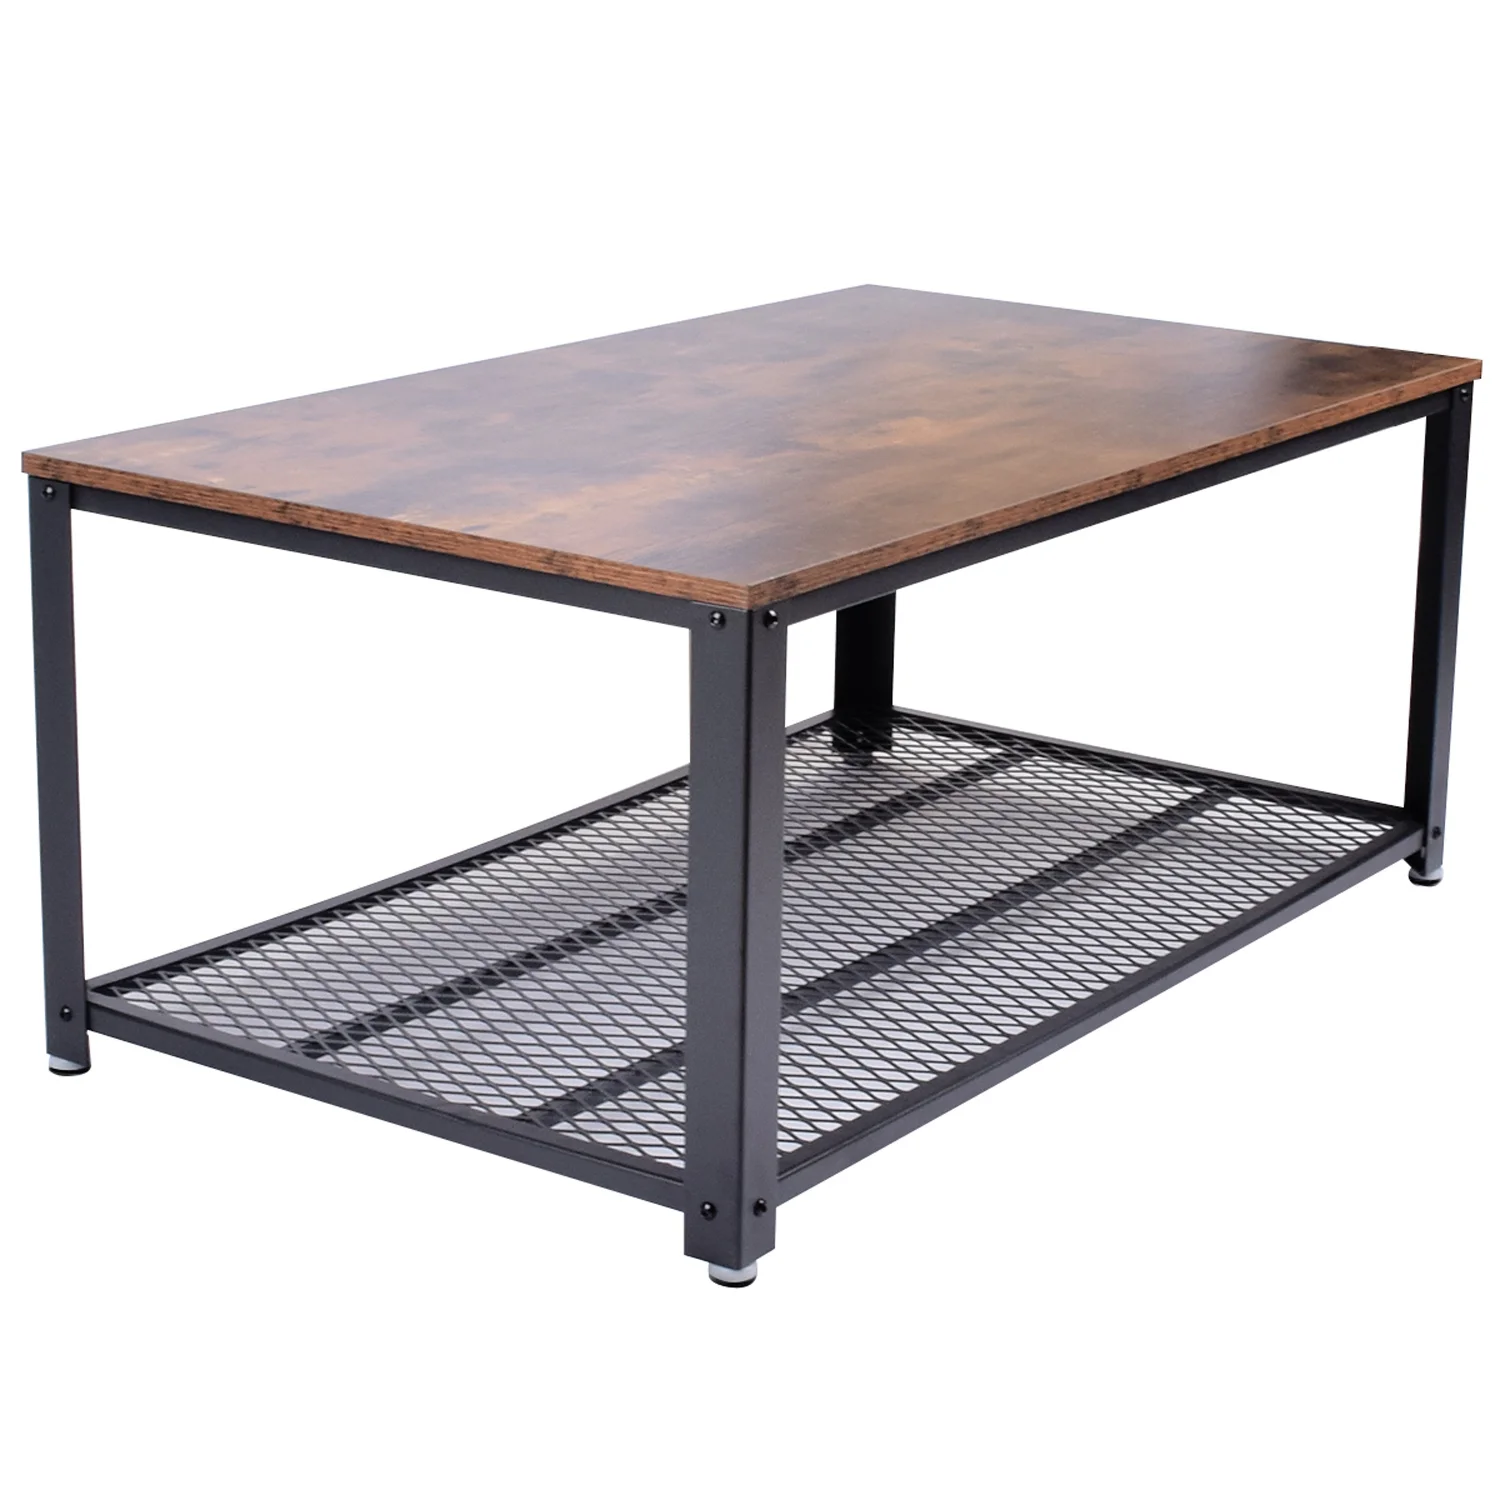 Drm Rustic Vintage Industrial Metal Wooden Coffee Table For Living Room Available In Us Eu Local Warehouse Buy End Table Coffee Table Side Table Sofa Table End Table Living Room Table